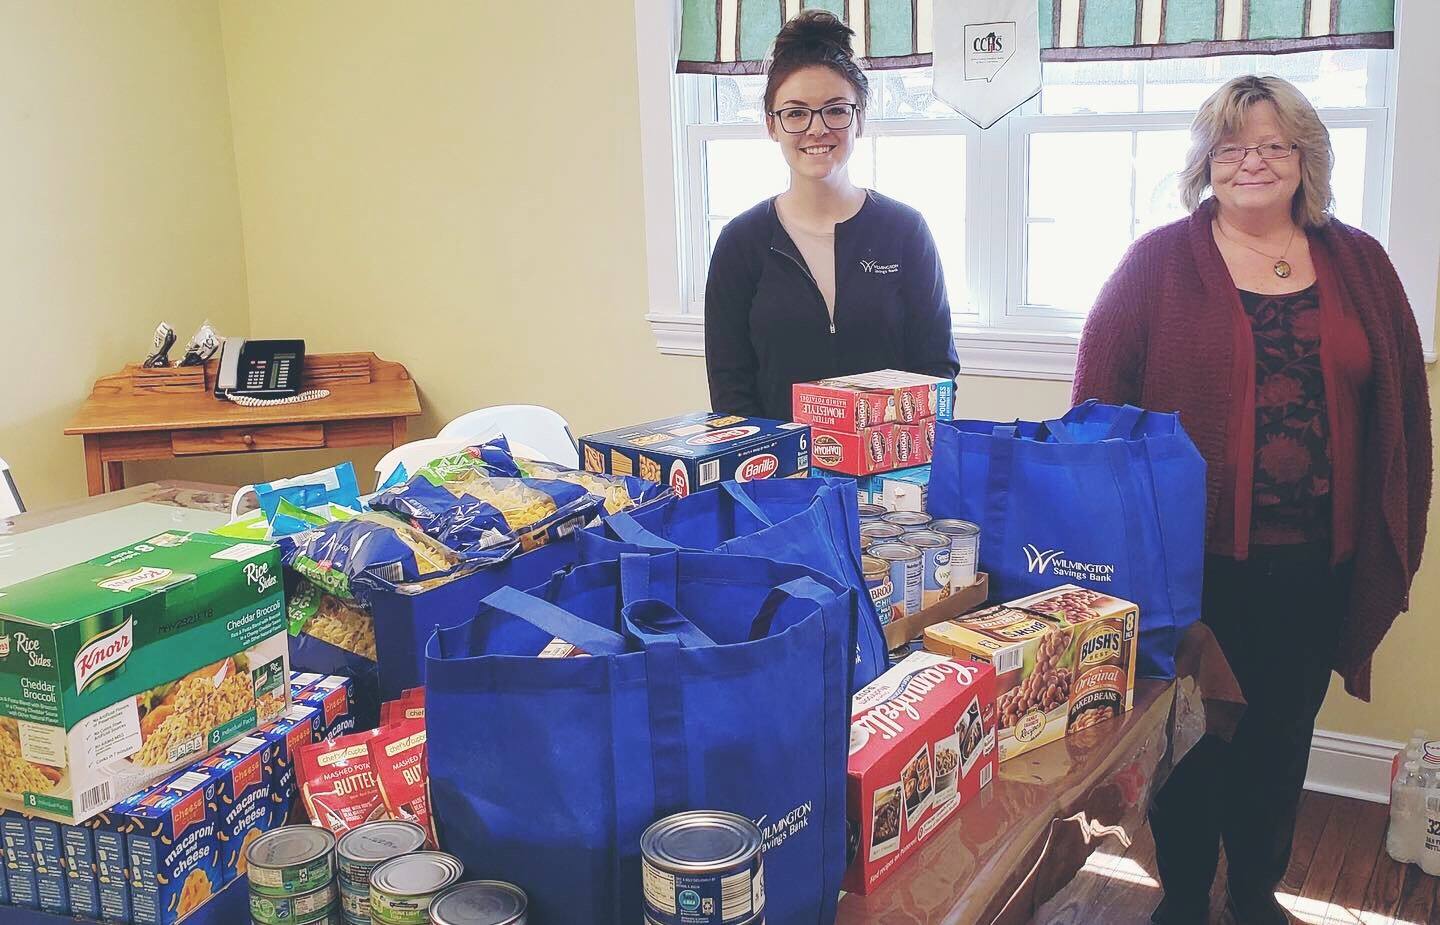 Food Pantry Donation